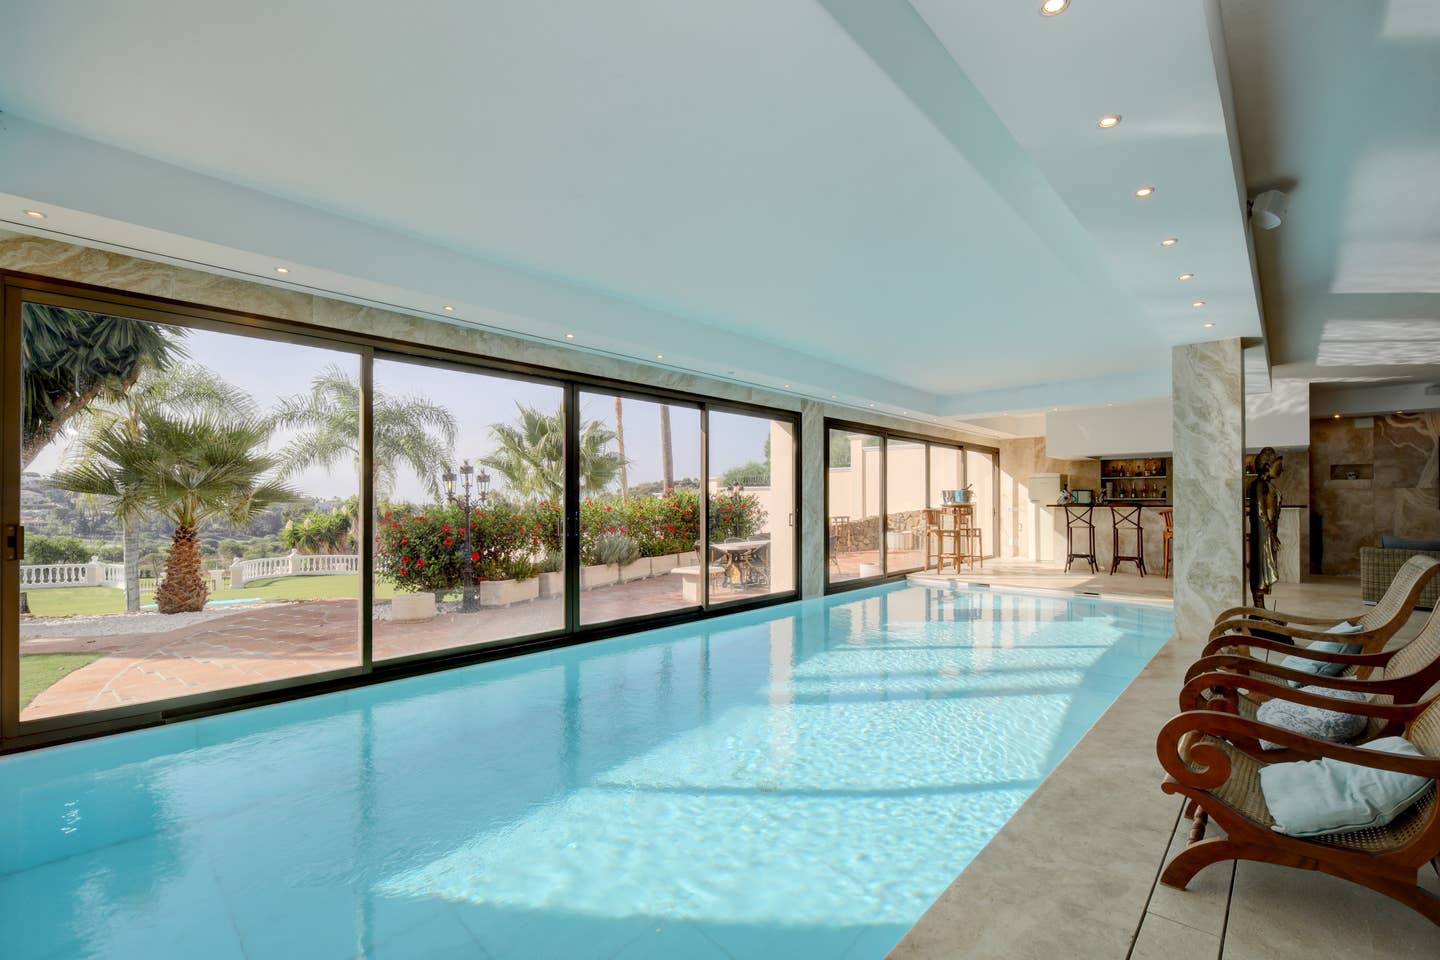 Property Image 2 - Exclusive villa indoor spa and stunning views over the golf course